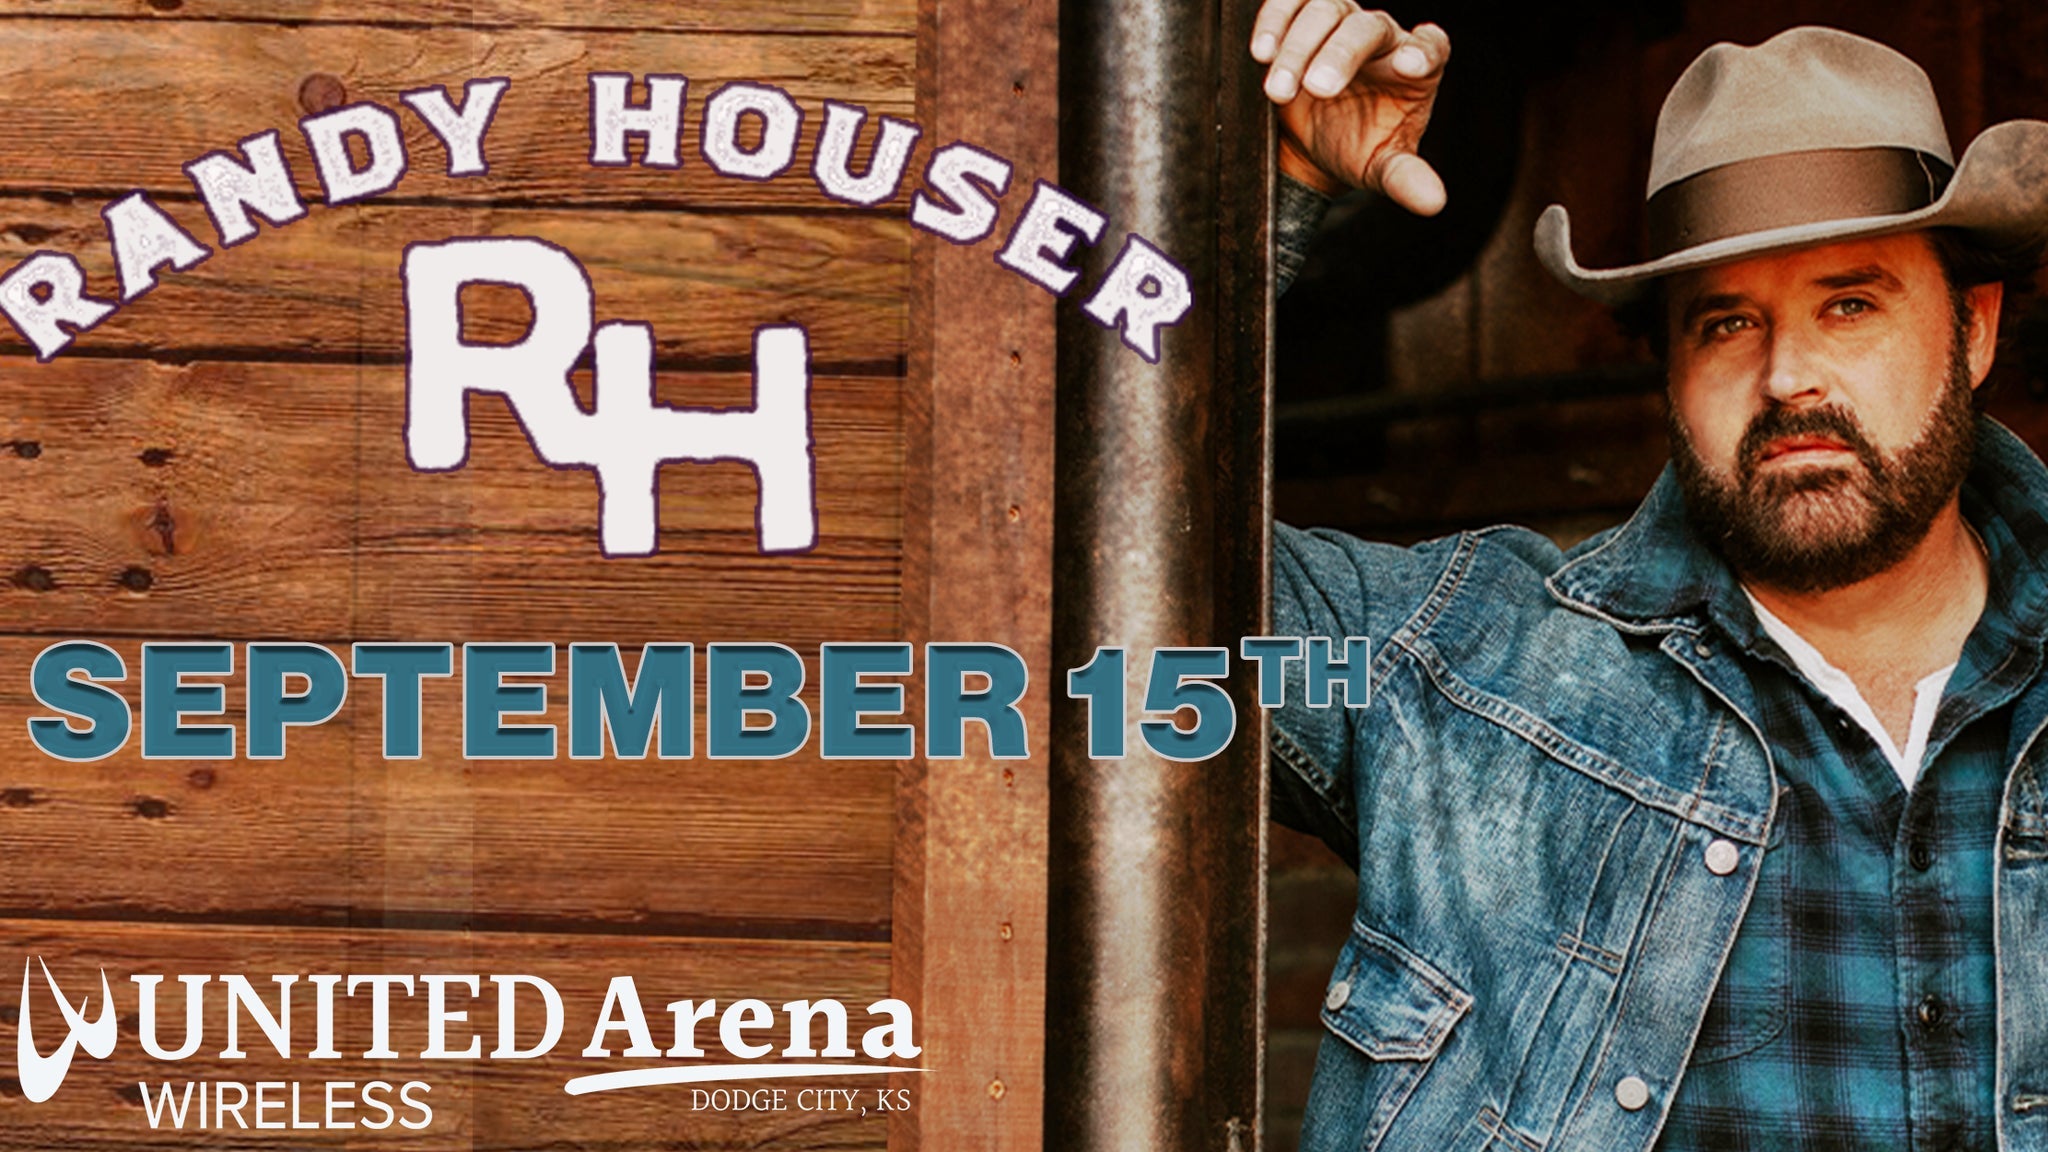 Randy Houser in Dodge City promo photo for $29 Labor Day Exclusive presale offer code